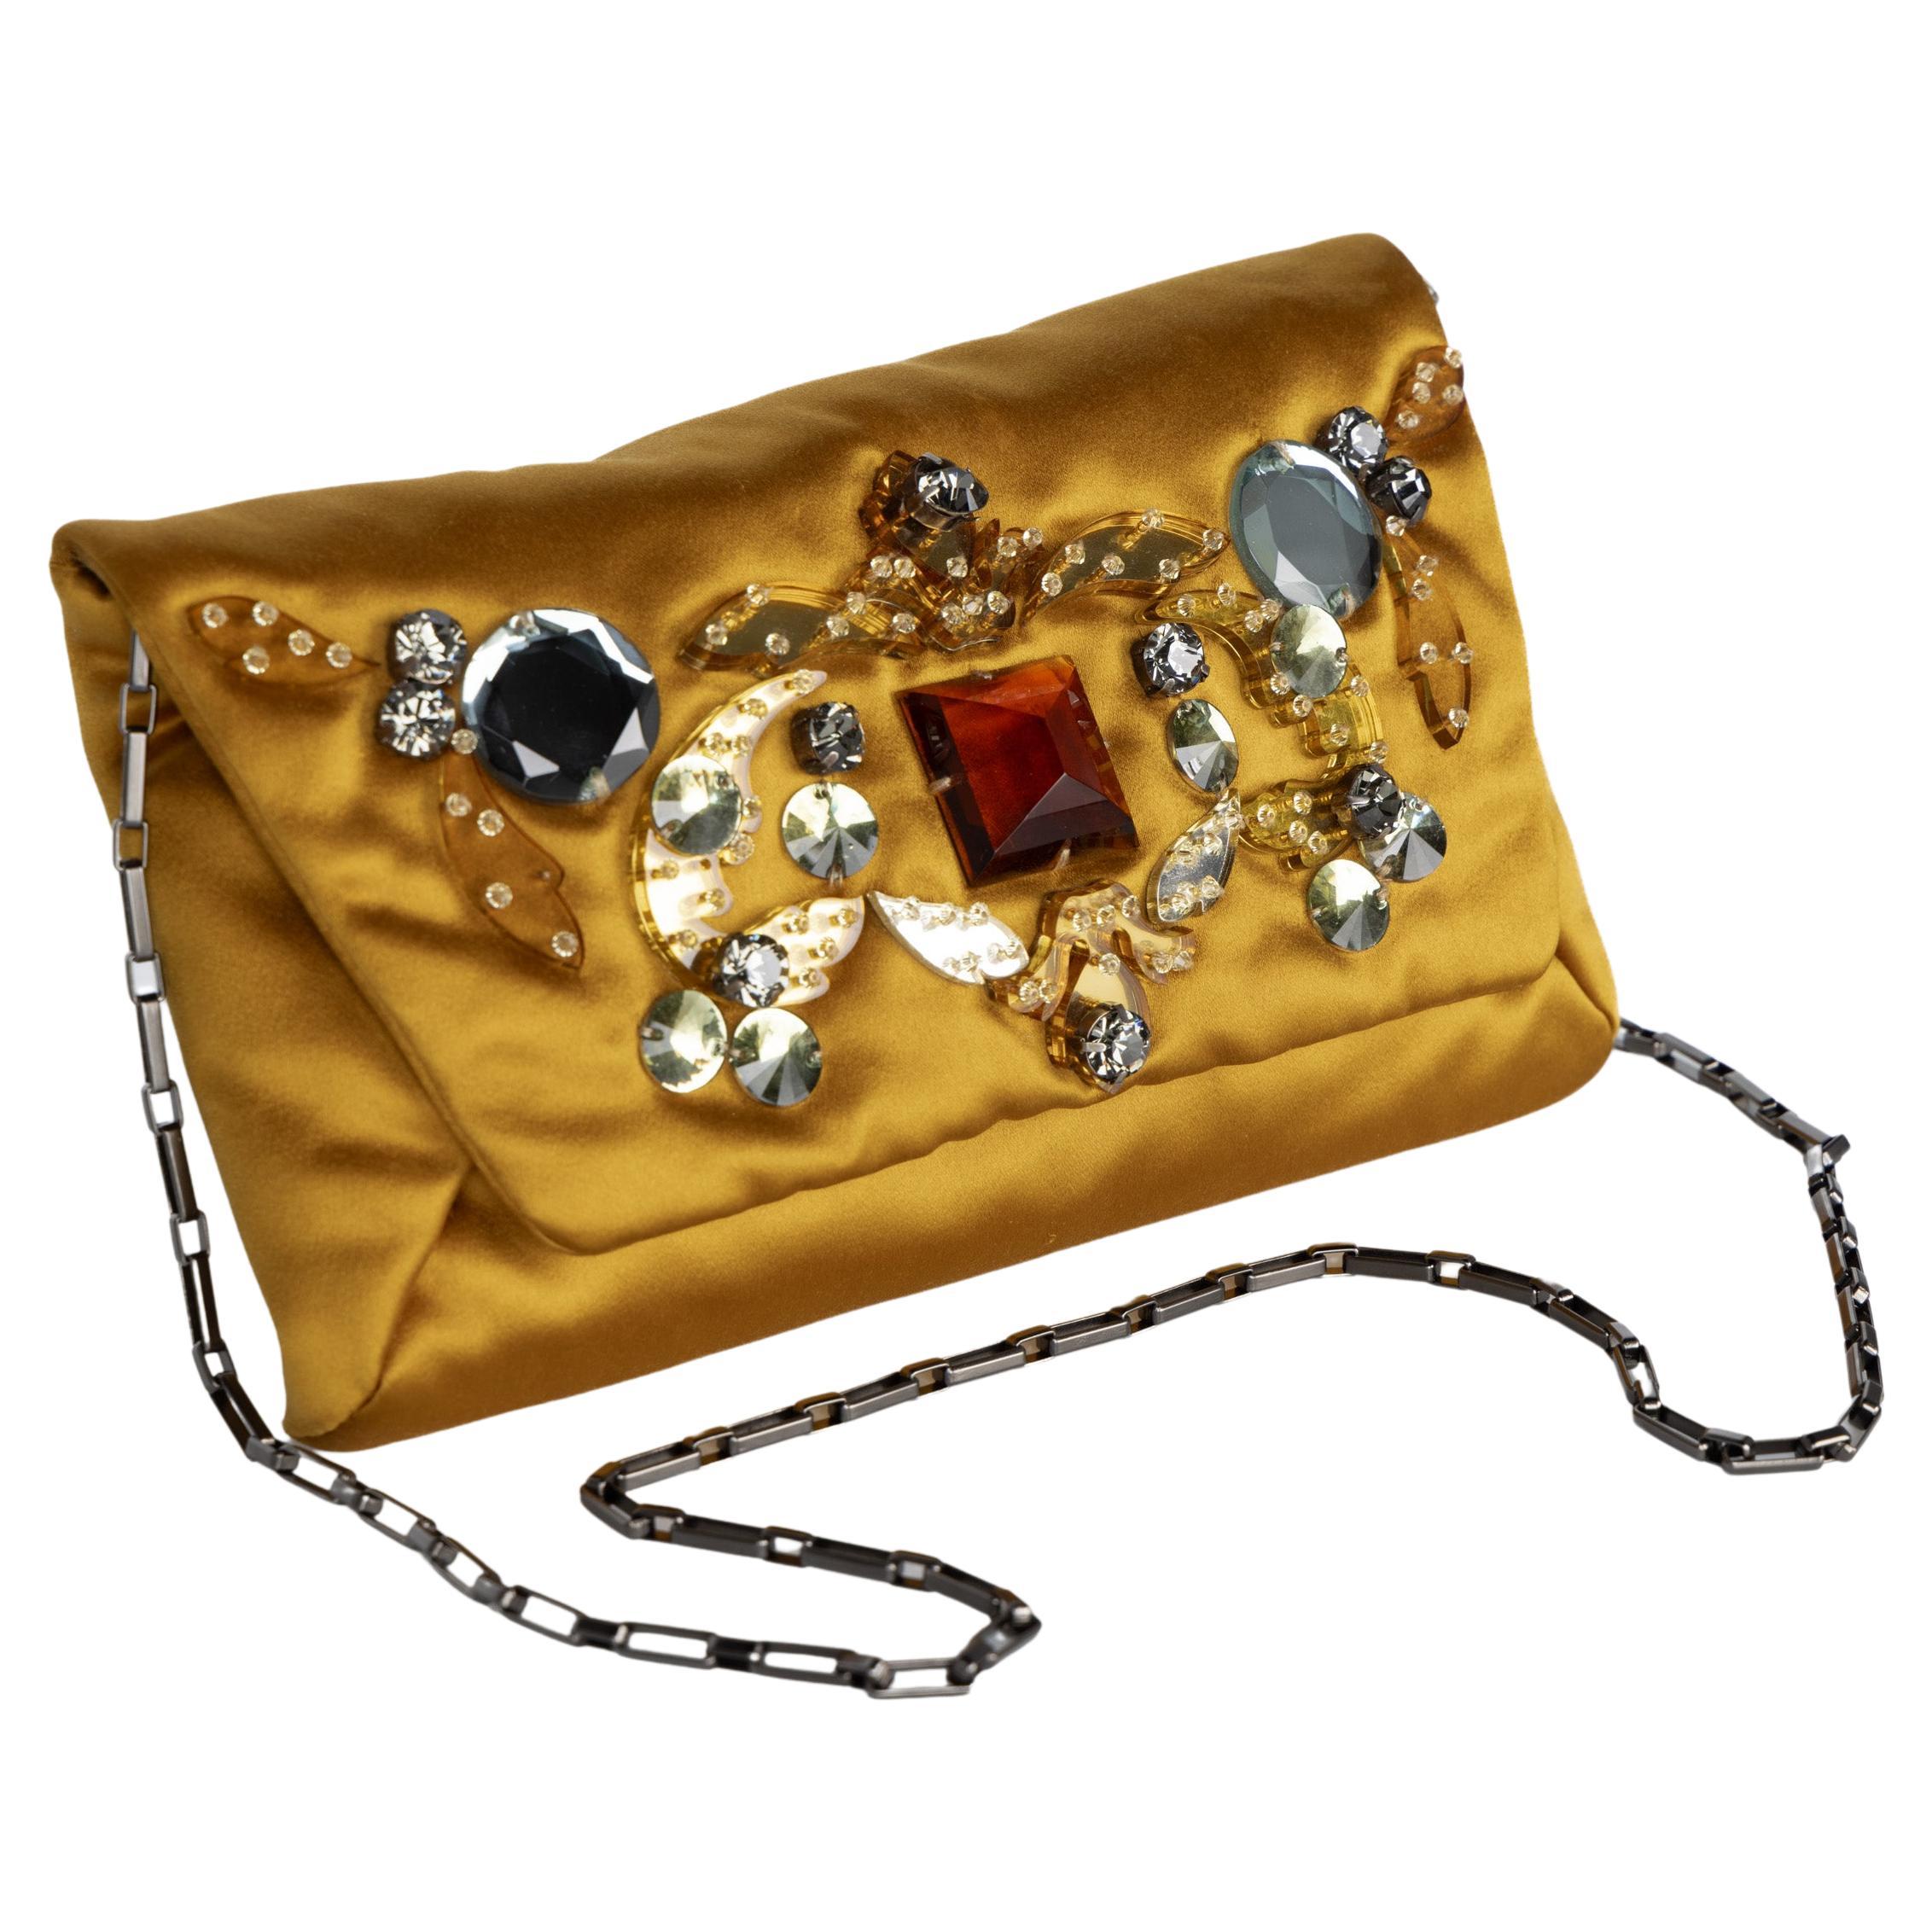 Lanvin Alber Elbaz Fall 2012 Satin Jewel Embellished Convertible Bag Clutch In Good Condition For Sale In Boca Raton, FL